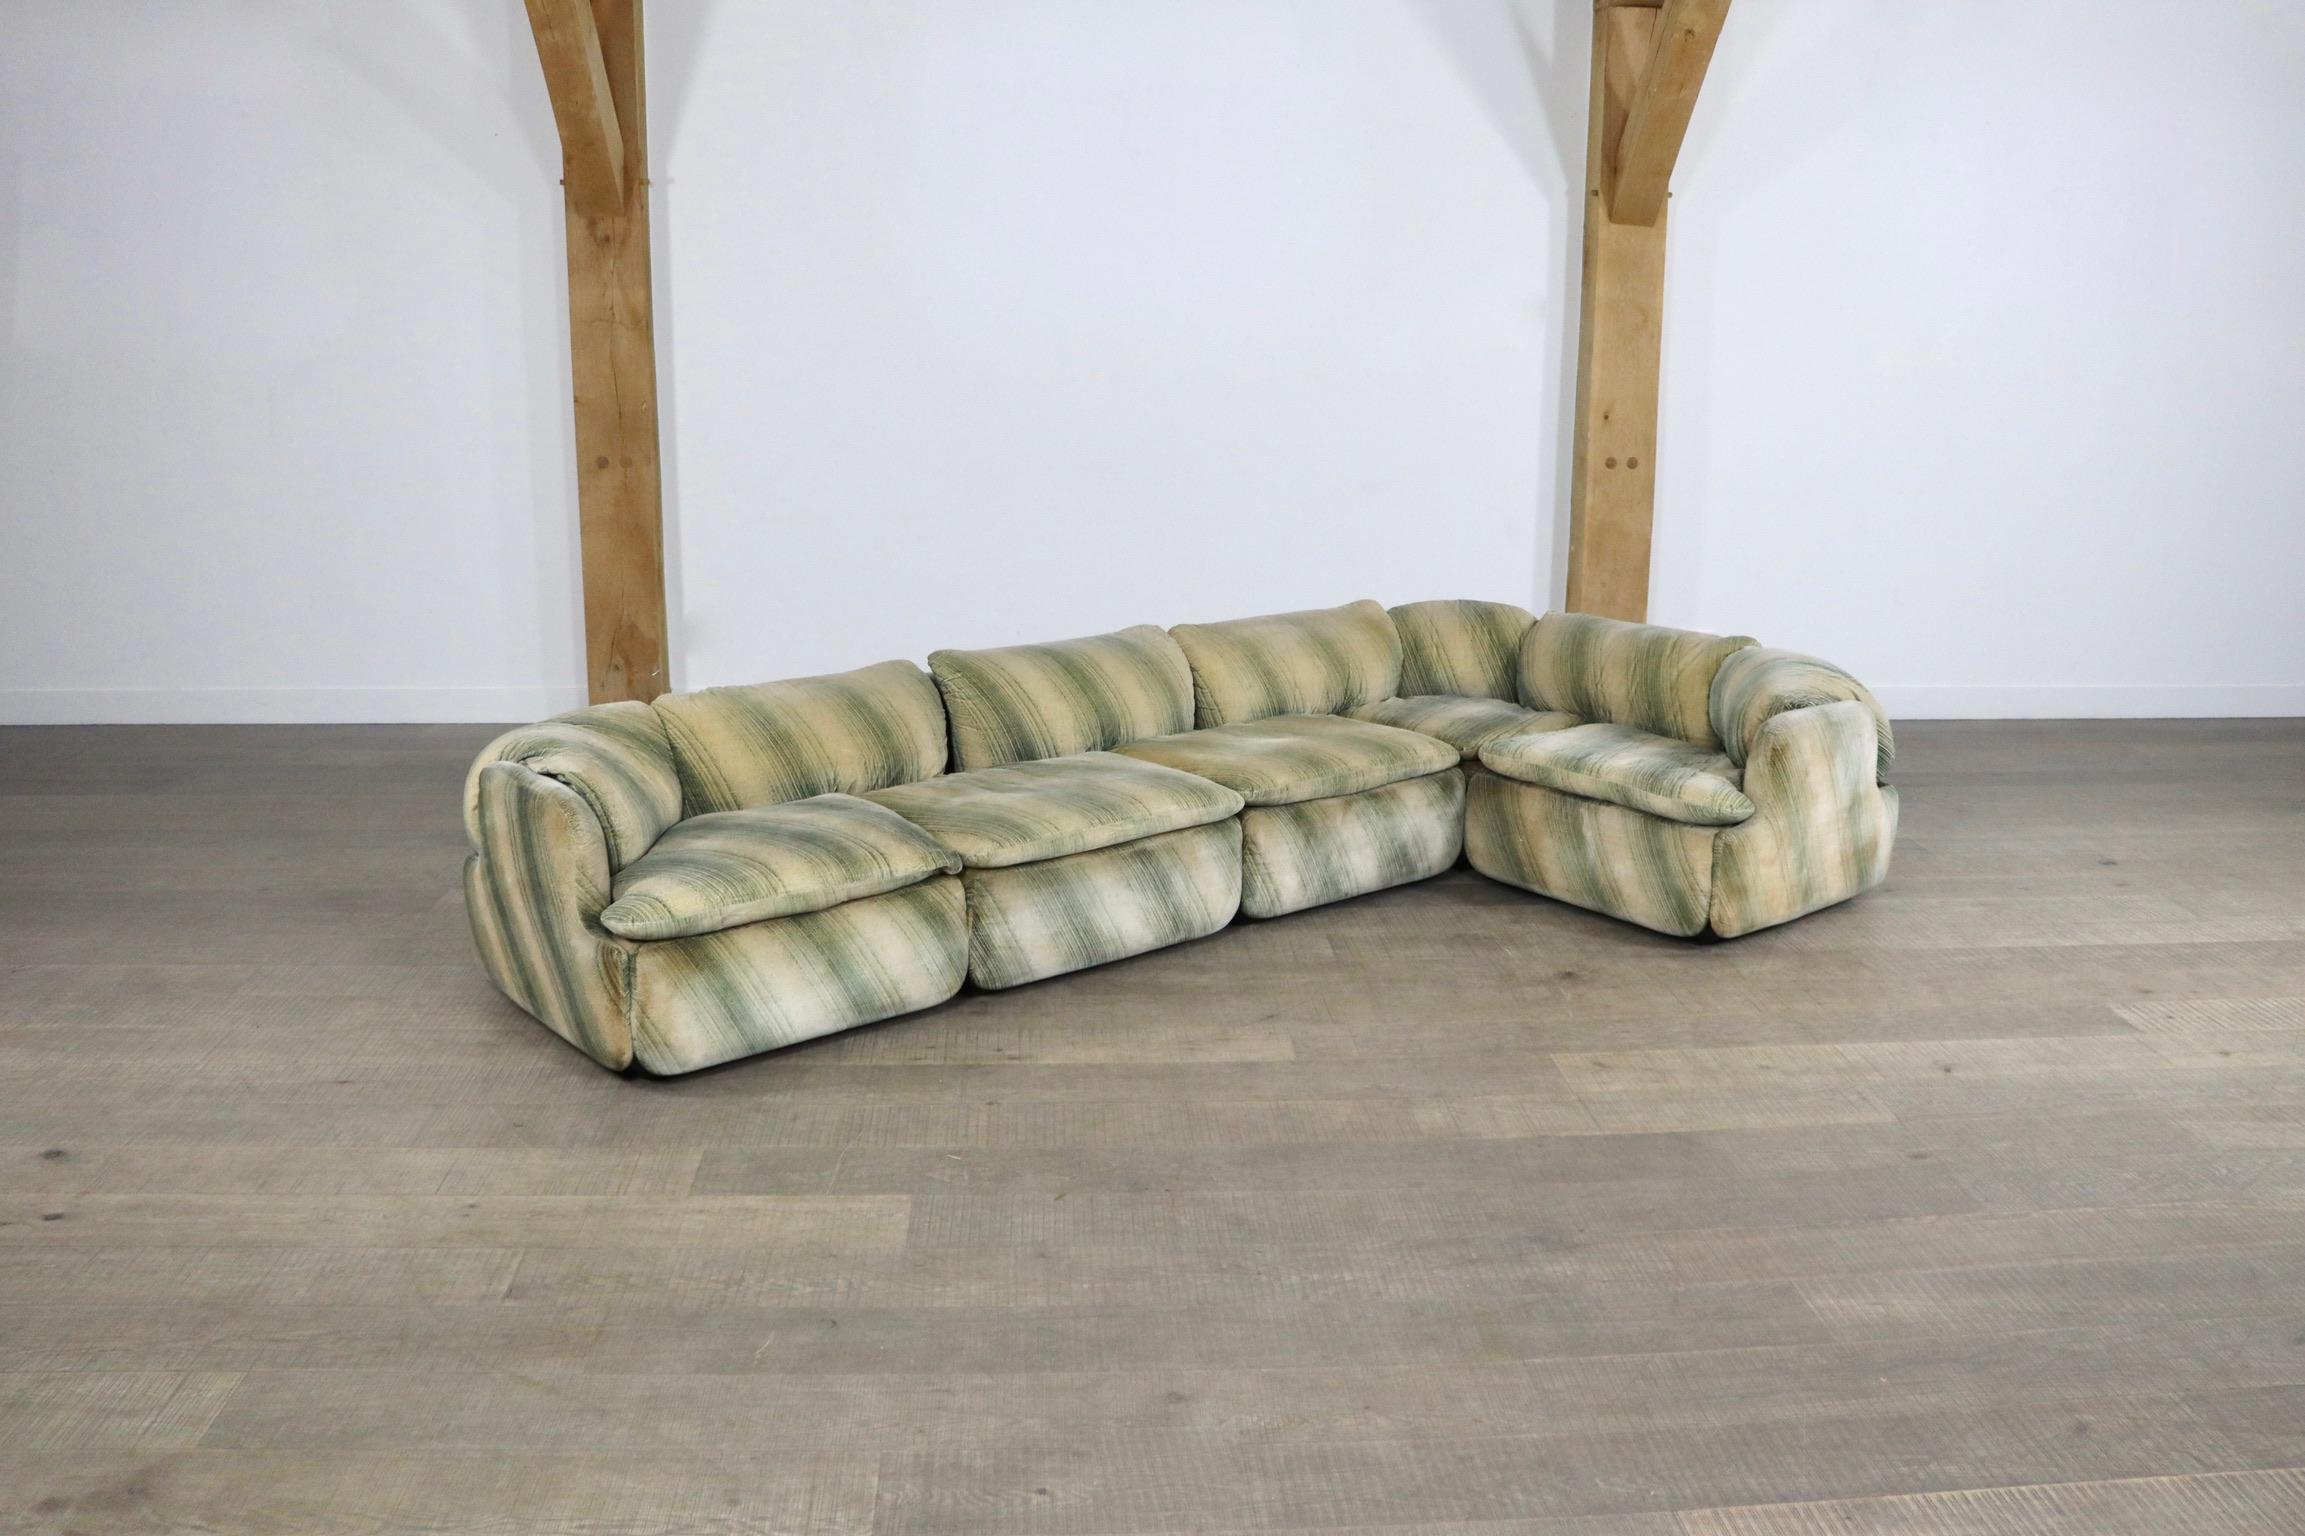 Nice modular sofa model Confidential by Alberto Rosselli for Saporiti, Italy 1970s. This sofa has its original velvet upholstery with a nice green and cream print. The set consist of five elements of which one corner. A playful set with high